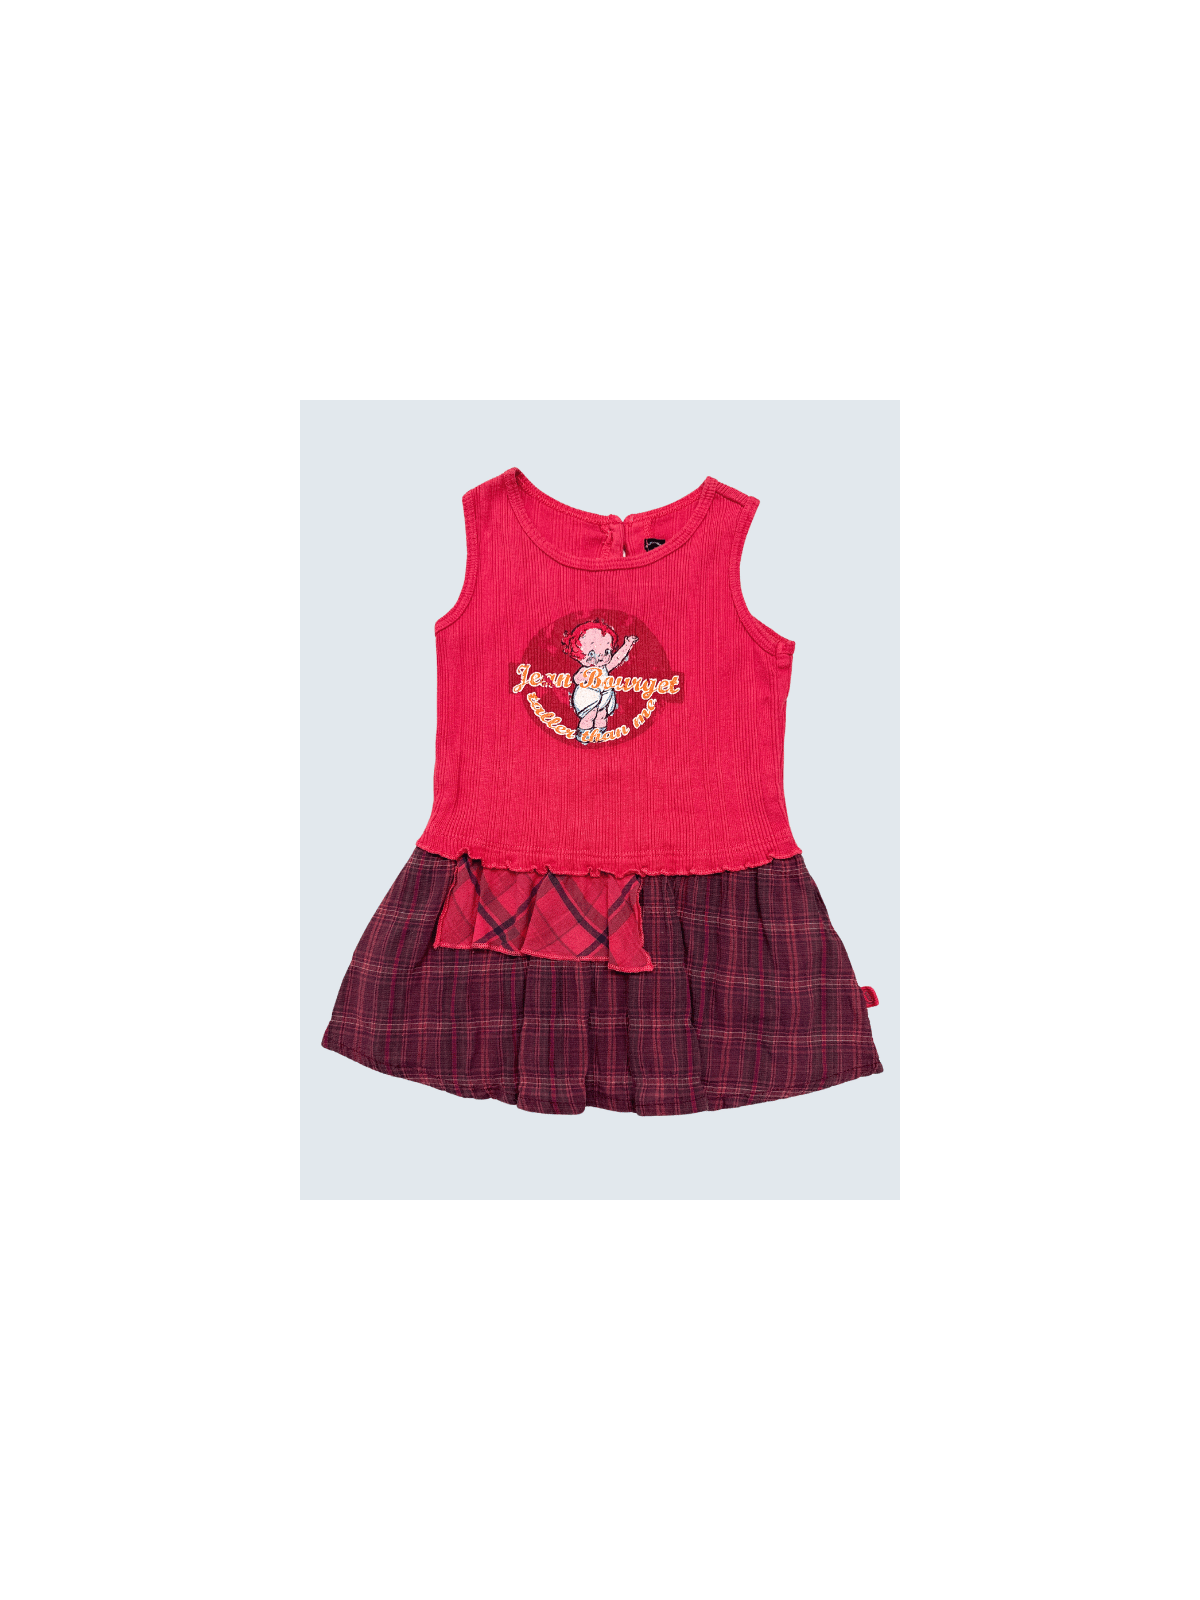 Robe d'occasion Jean Bourget 6 Mois pour fille.